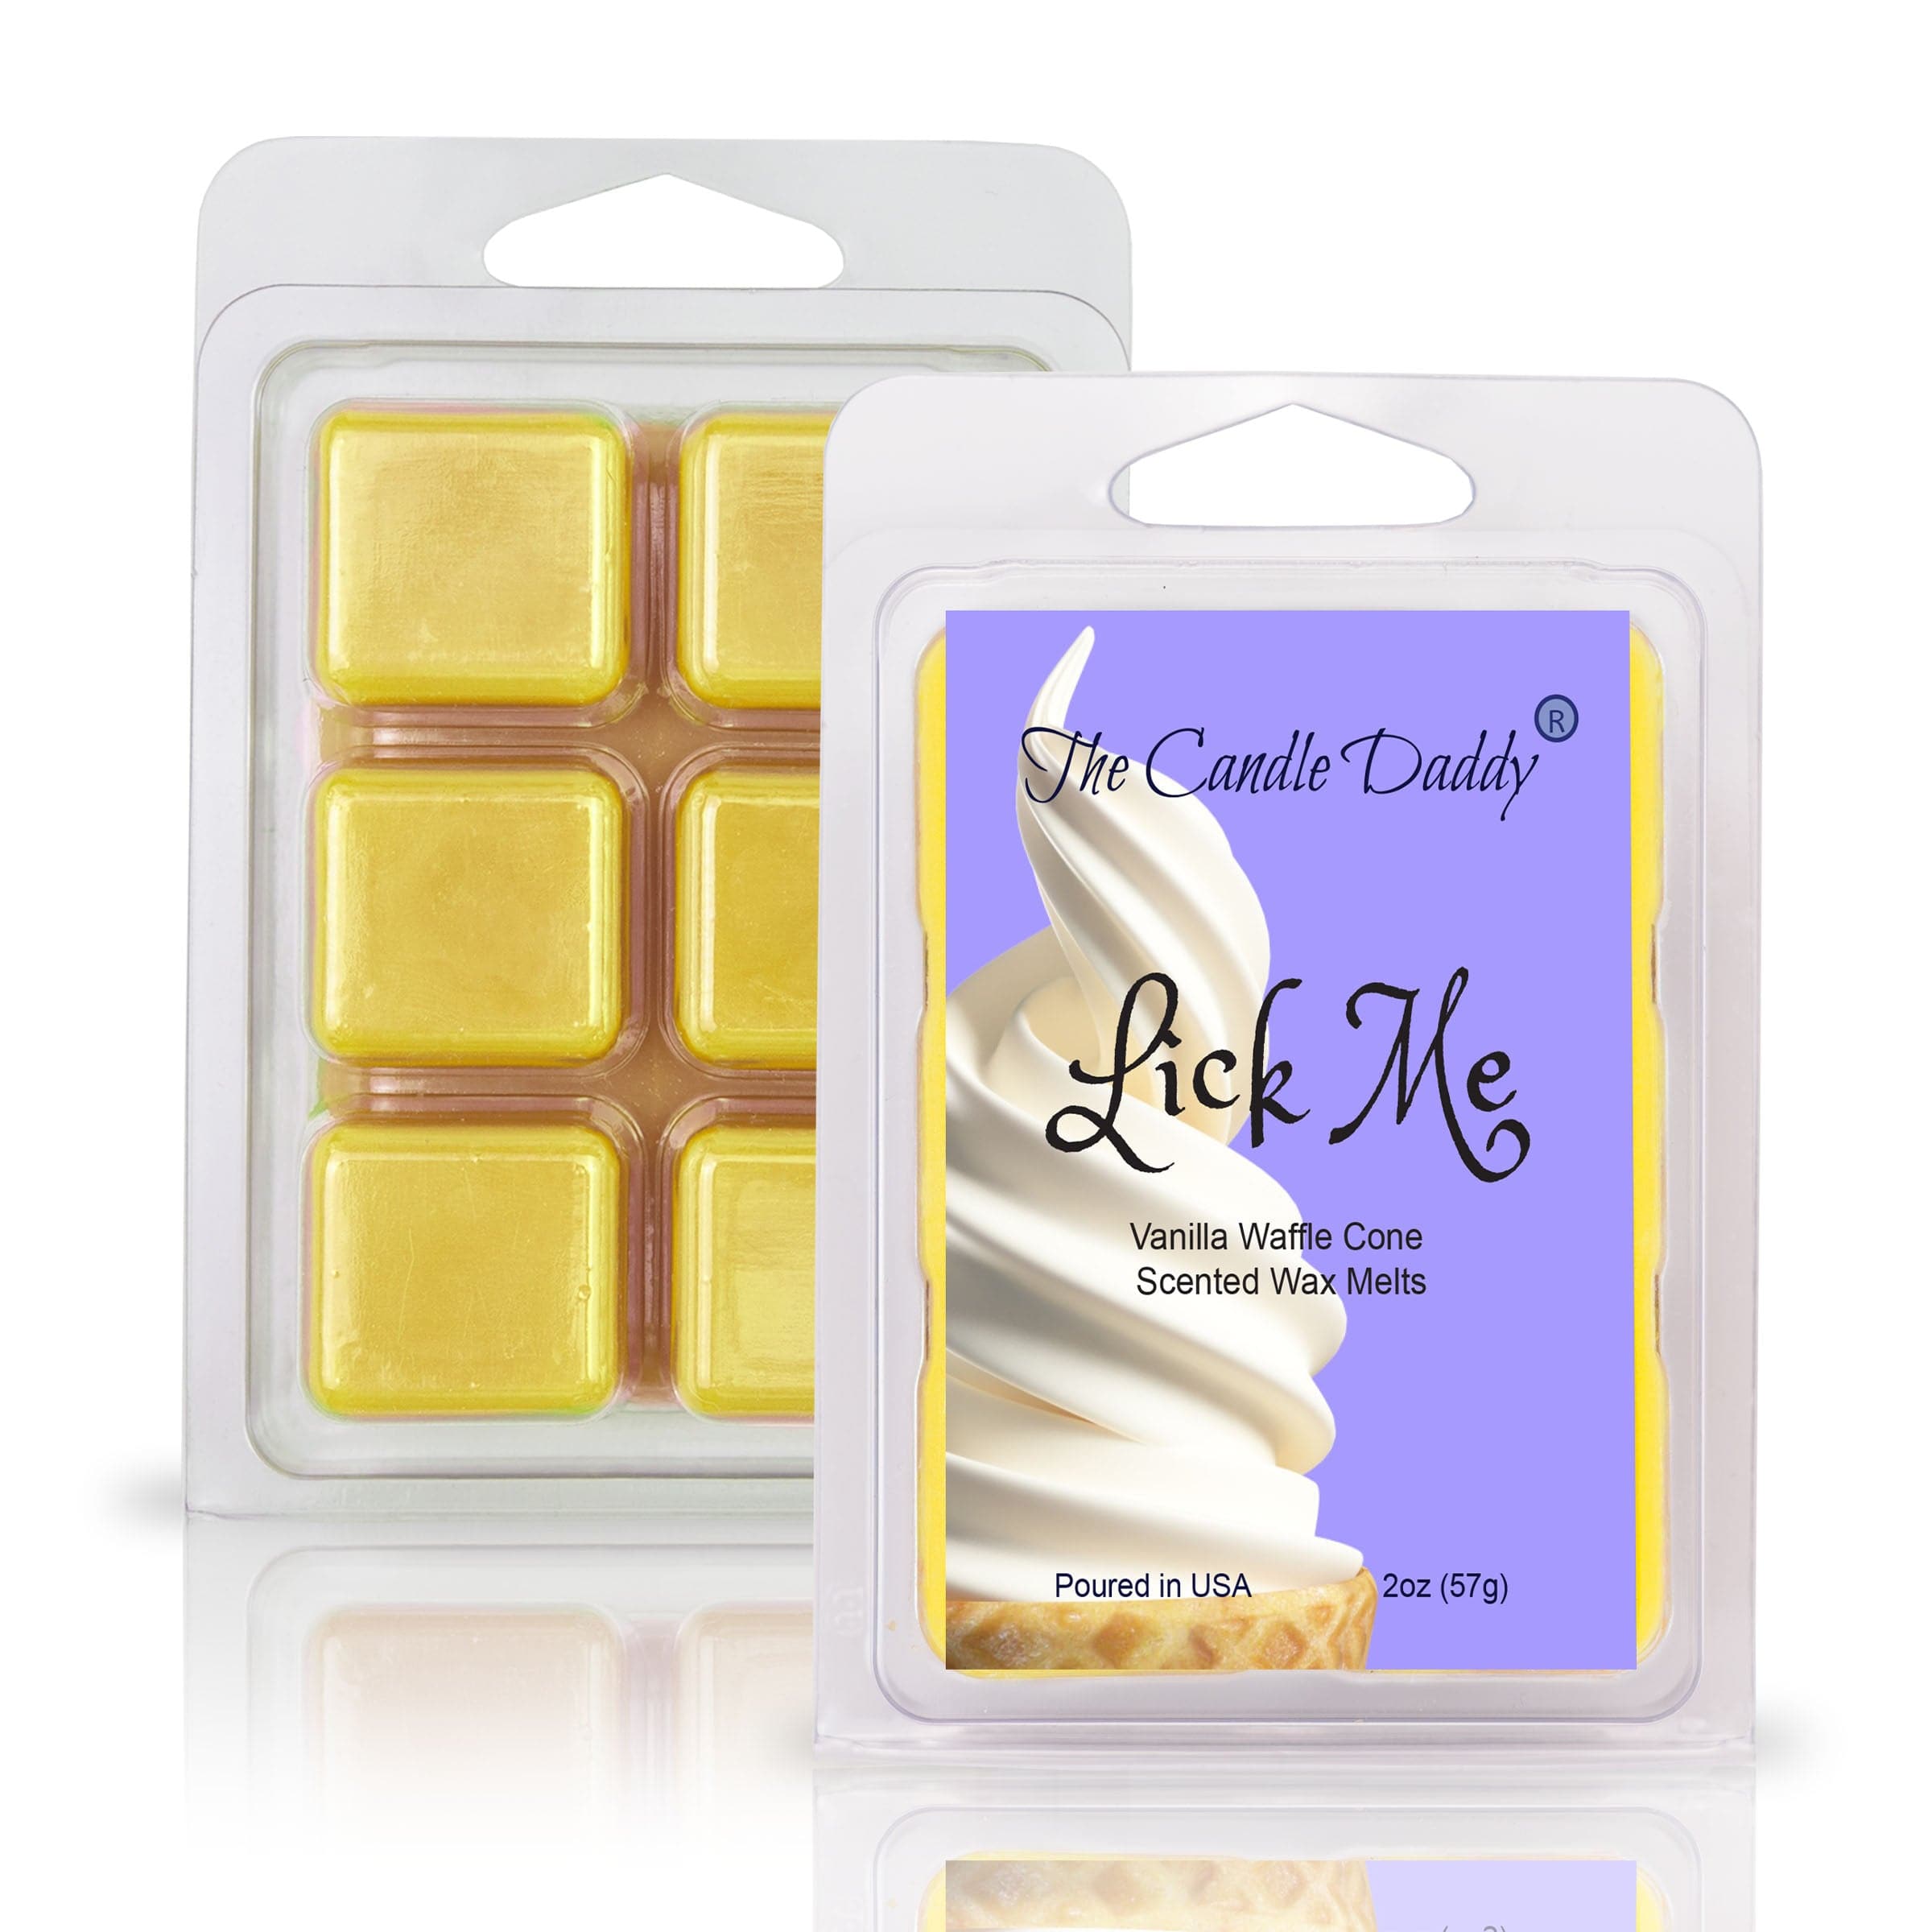 Lick Me - Vanilla Waffle Cone Ice Cream Scented Wax Melt - 1 Pack - 2